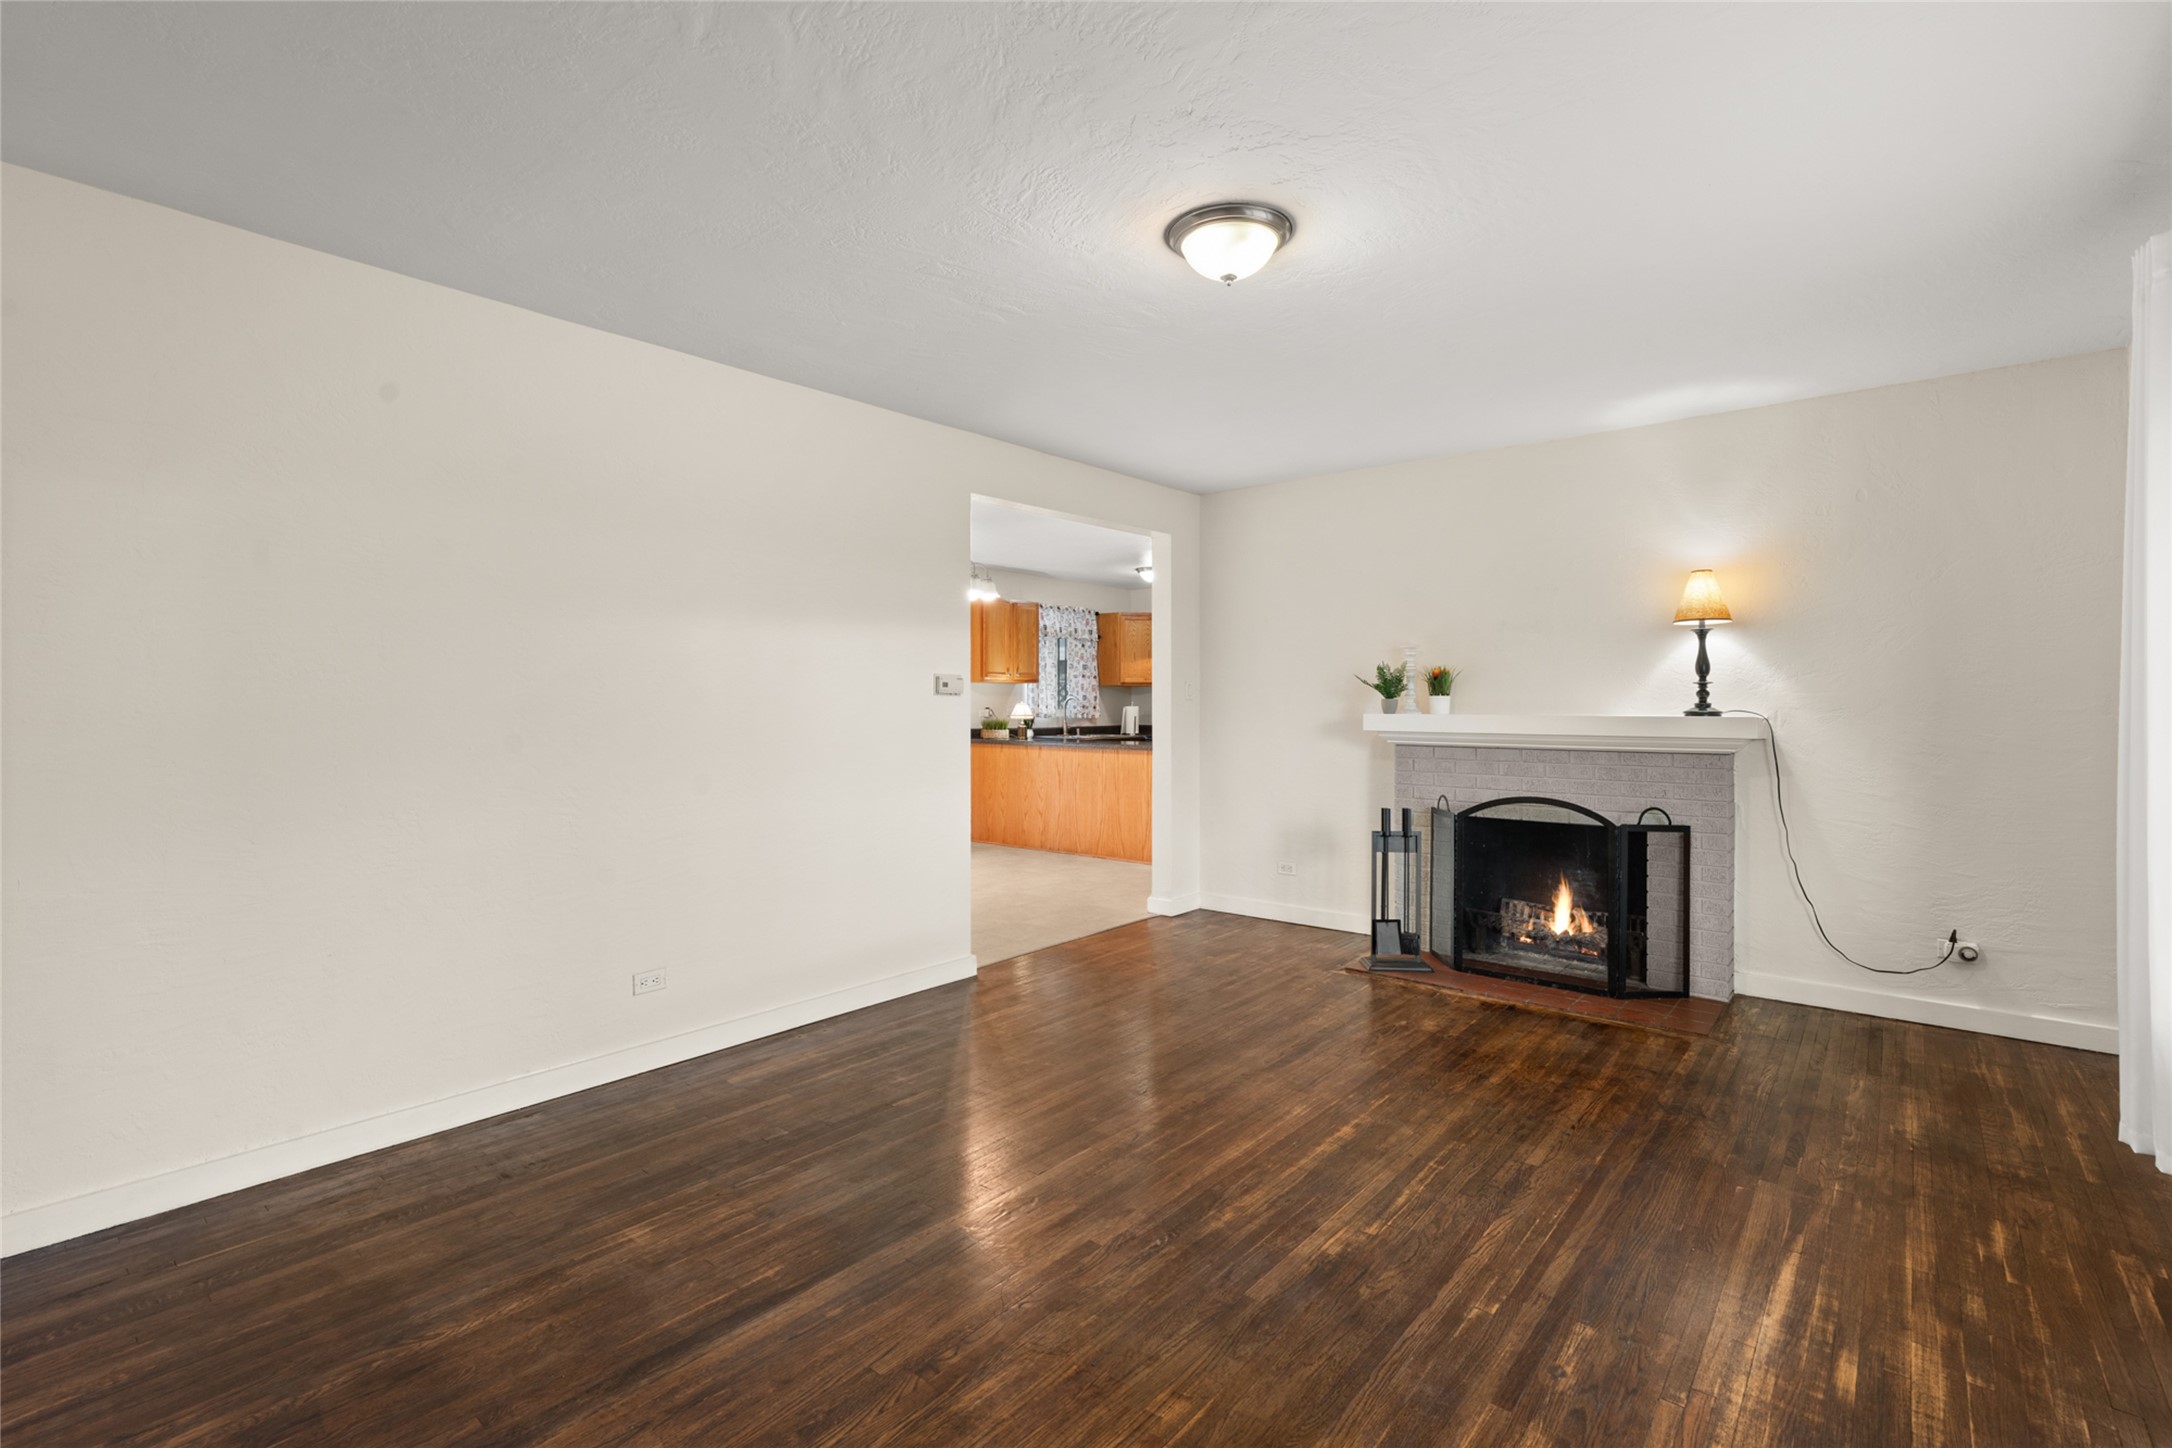 Livingroom with wood floors, looking into dinin groom and Kitchen